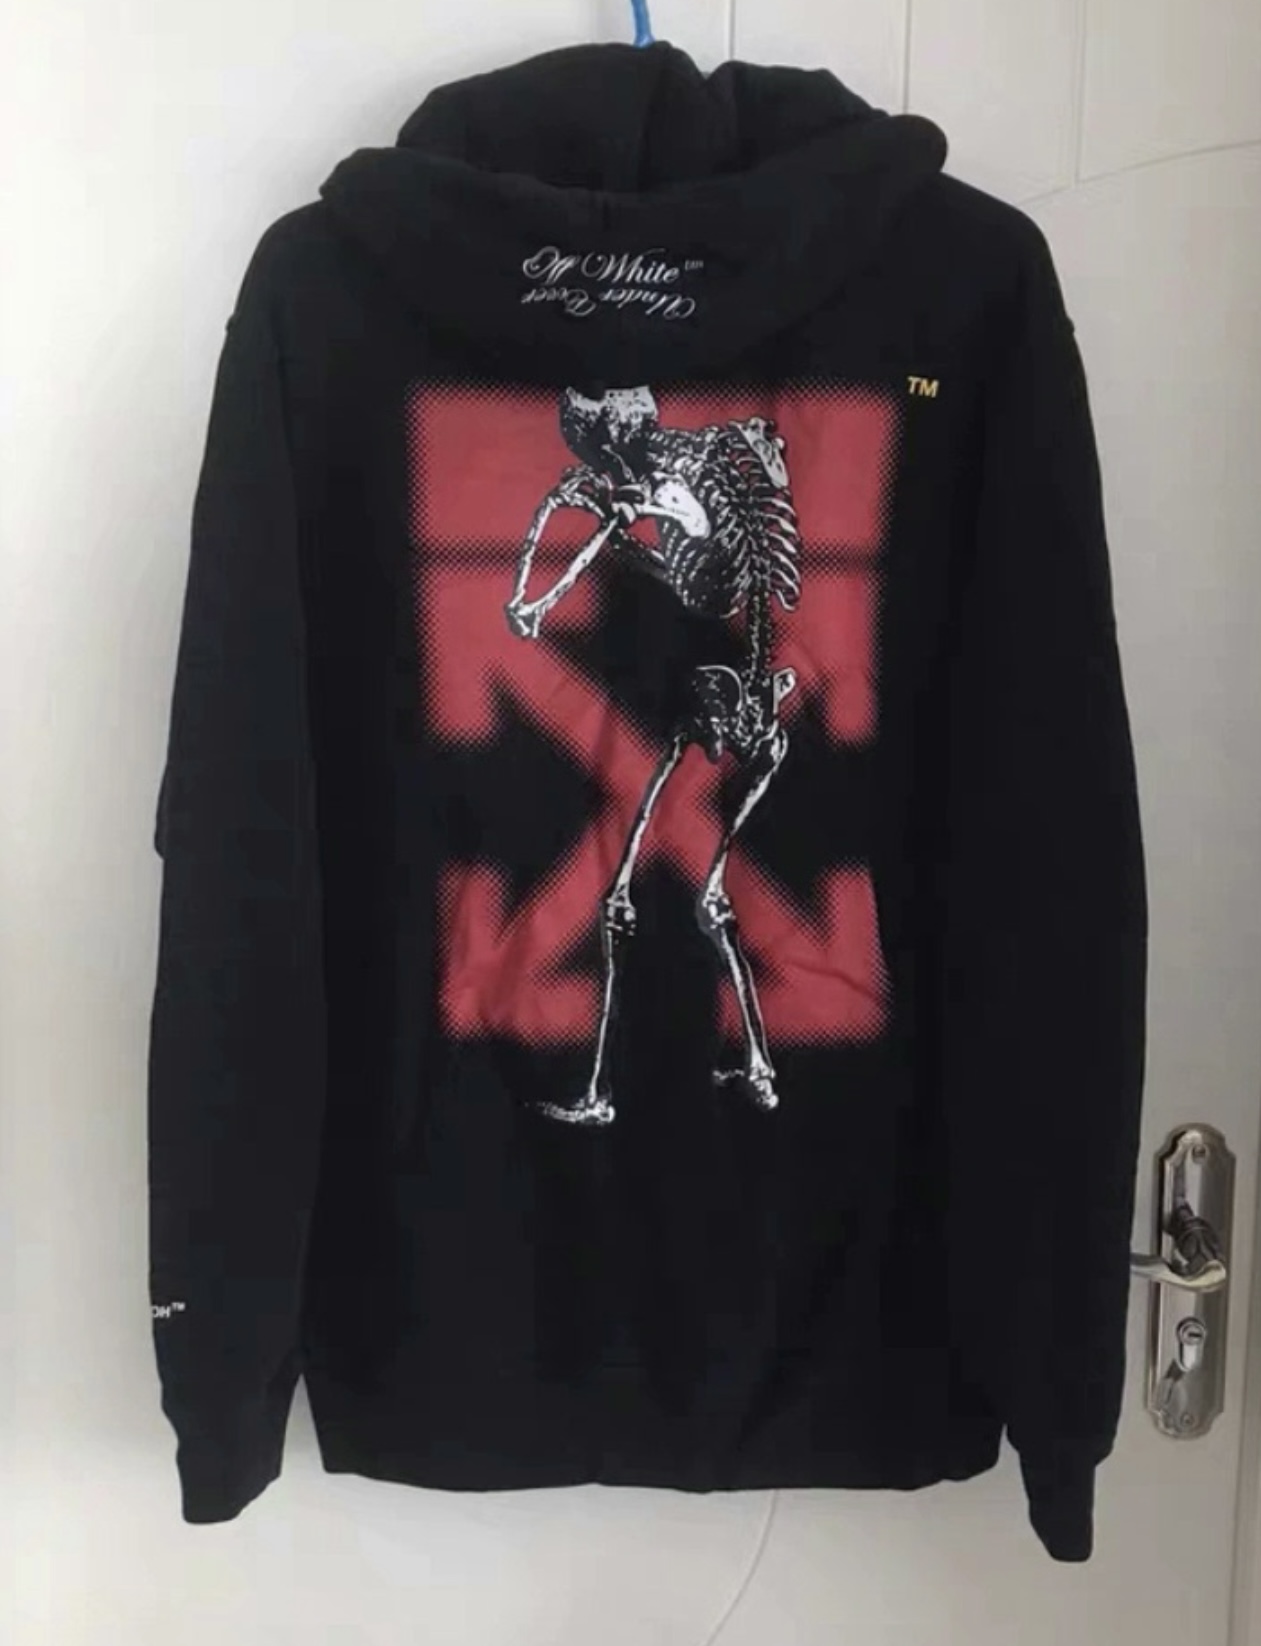 Undercover x Off-white hoodie - 1